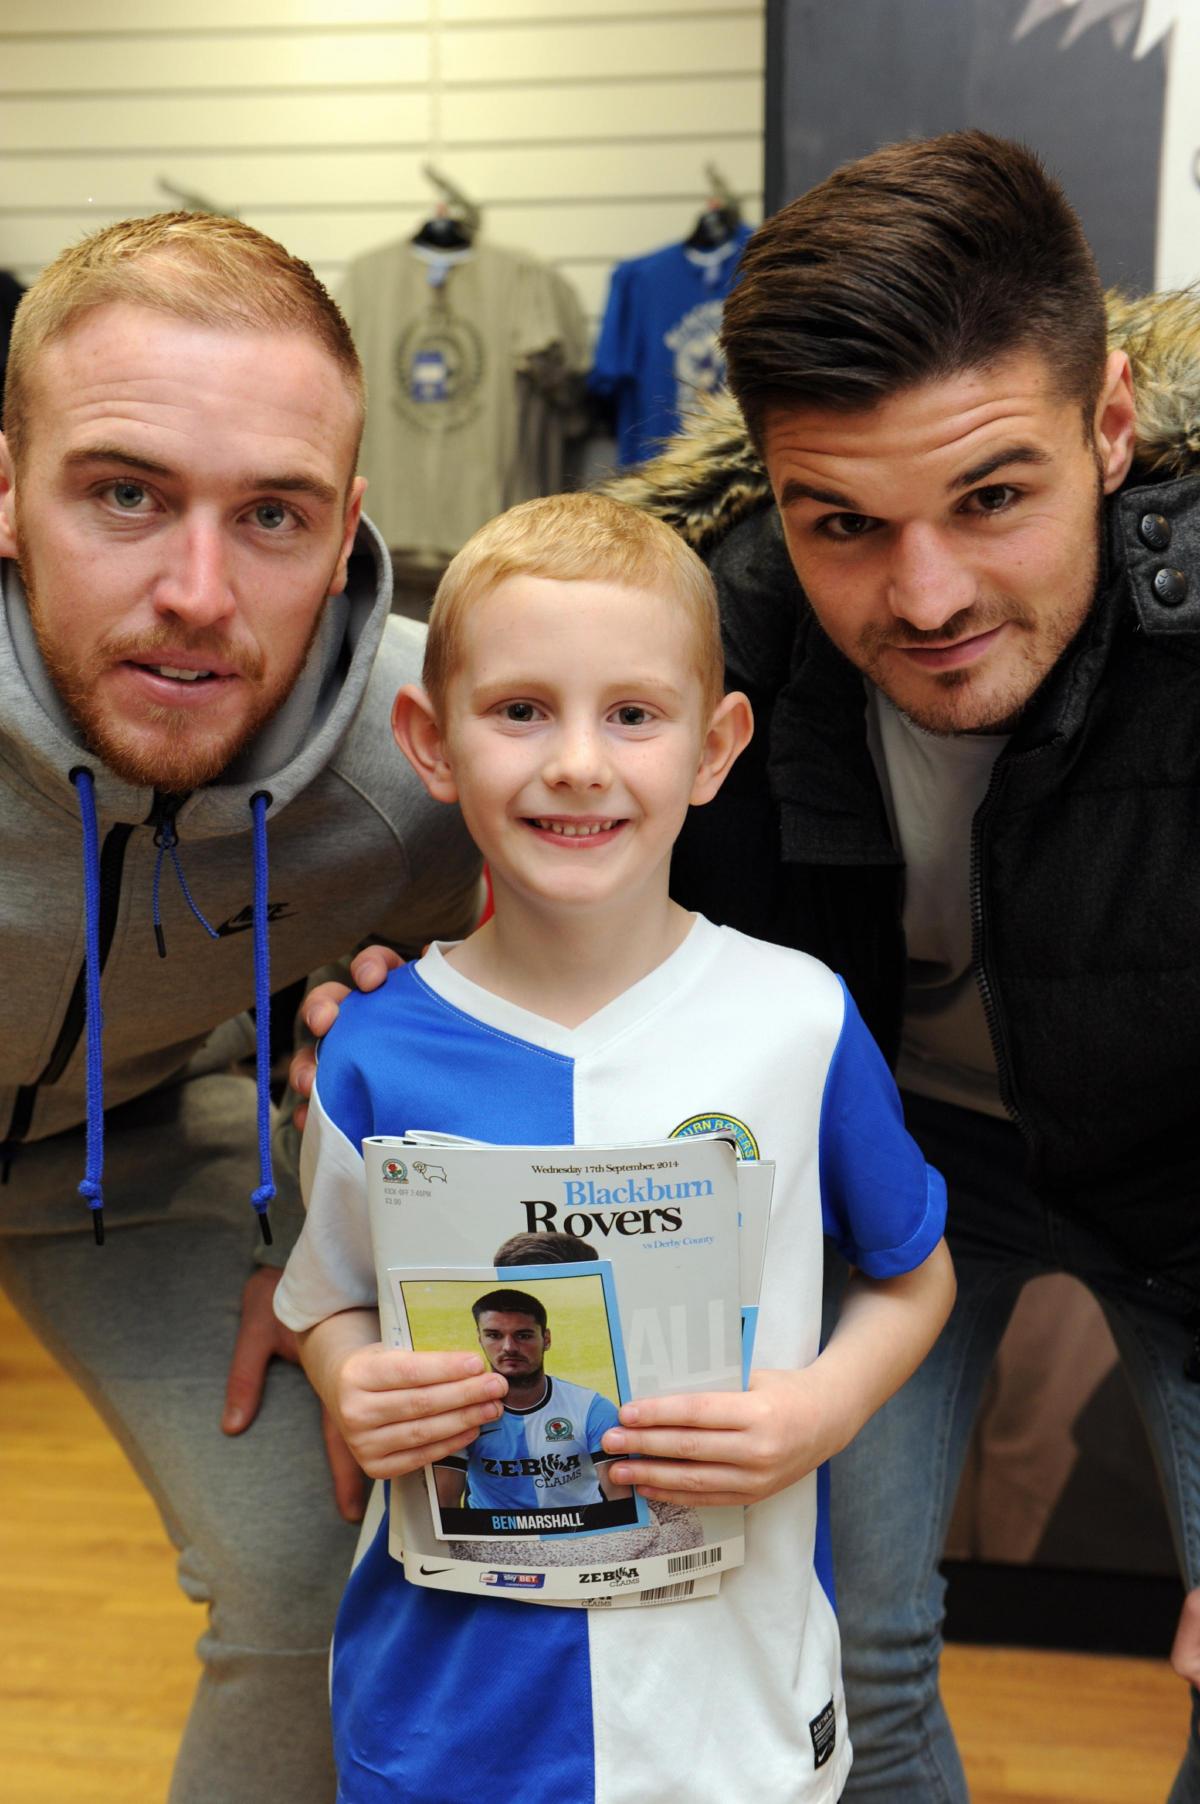 Blackburn Rovers stars Jason Steele and Ben Marshall, were at the Rovers shop at Ewood Park, to meet fans and sign autographs.